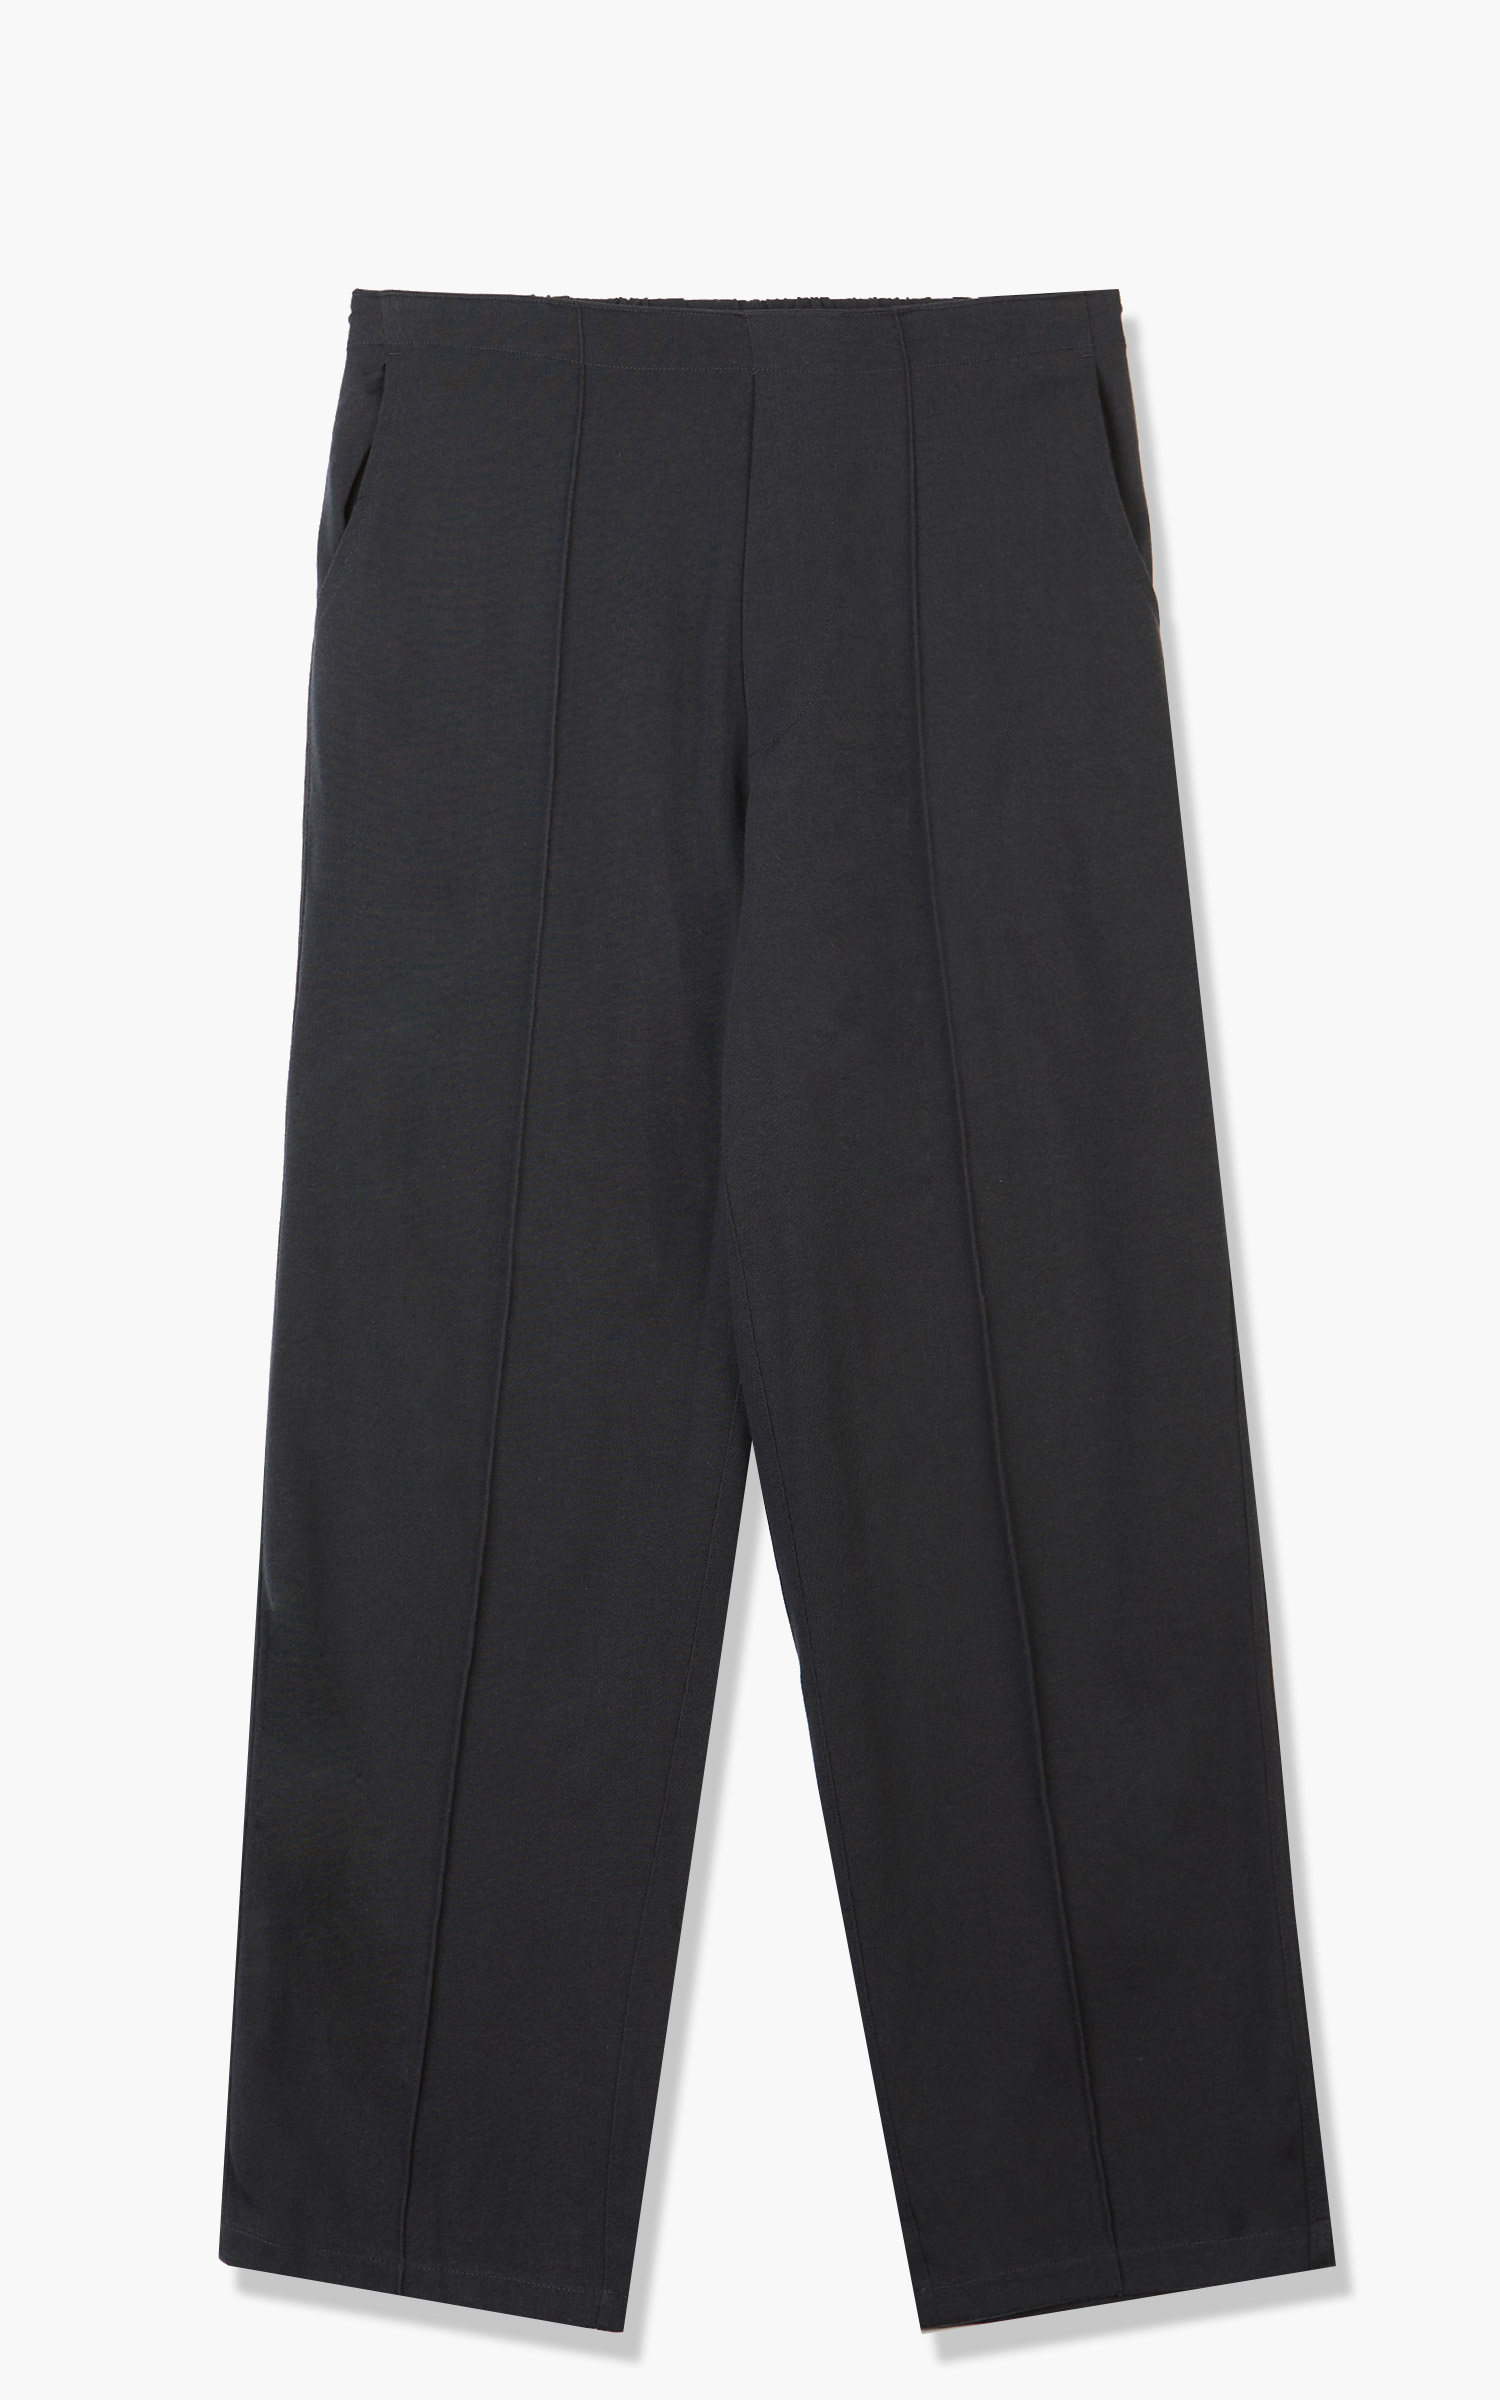 Lady White Co. Band Pant Graphite | Cultizm